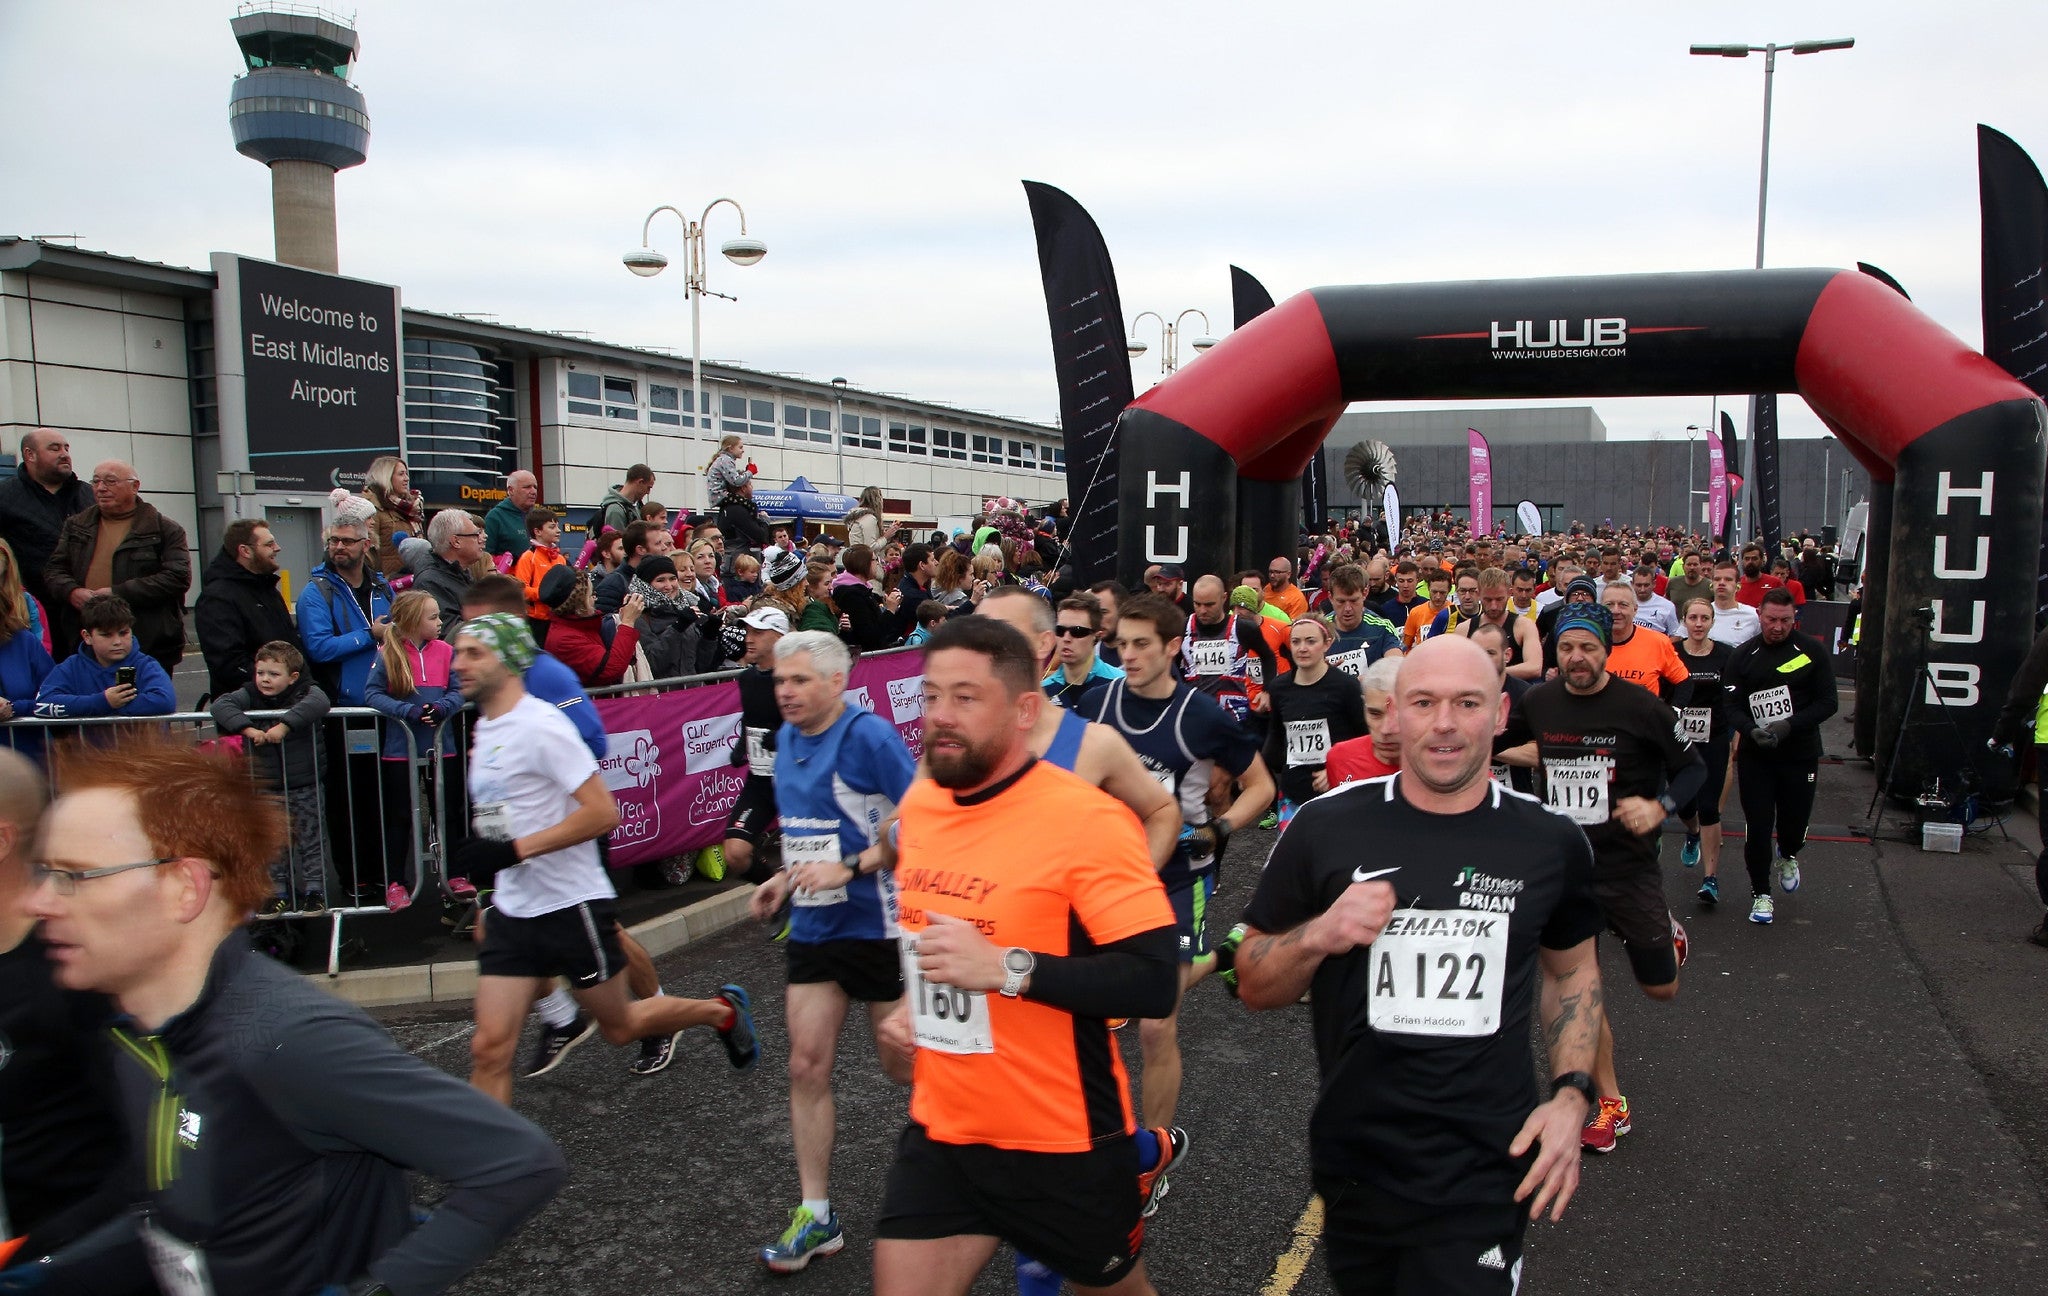 Local Runners Join Unique East Midlands Airport Event